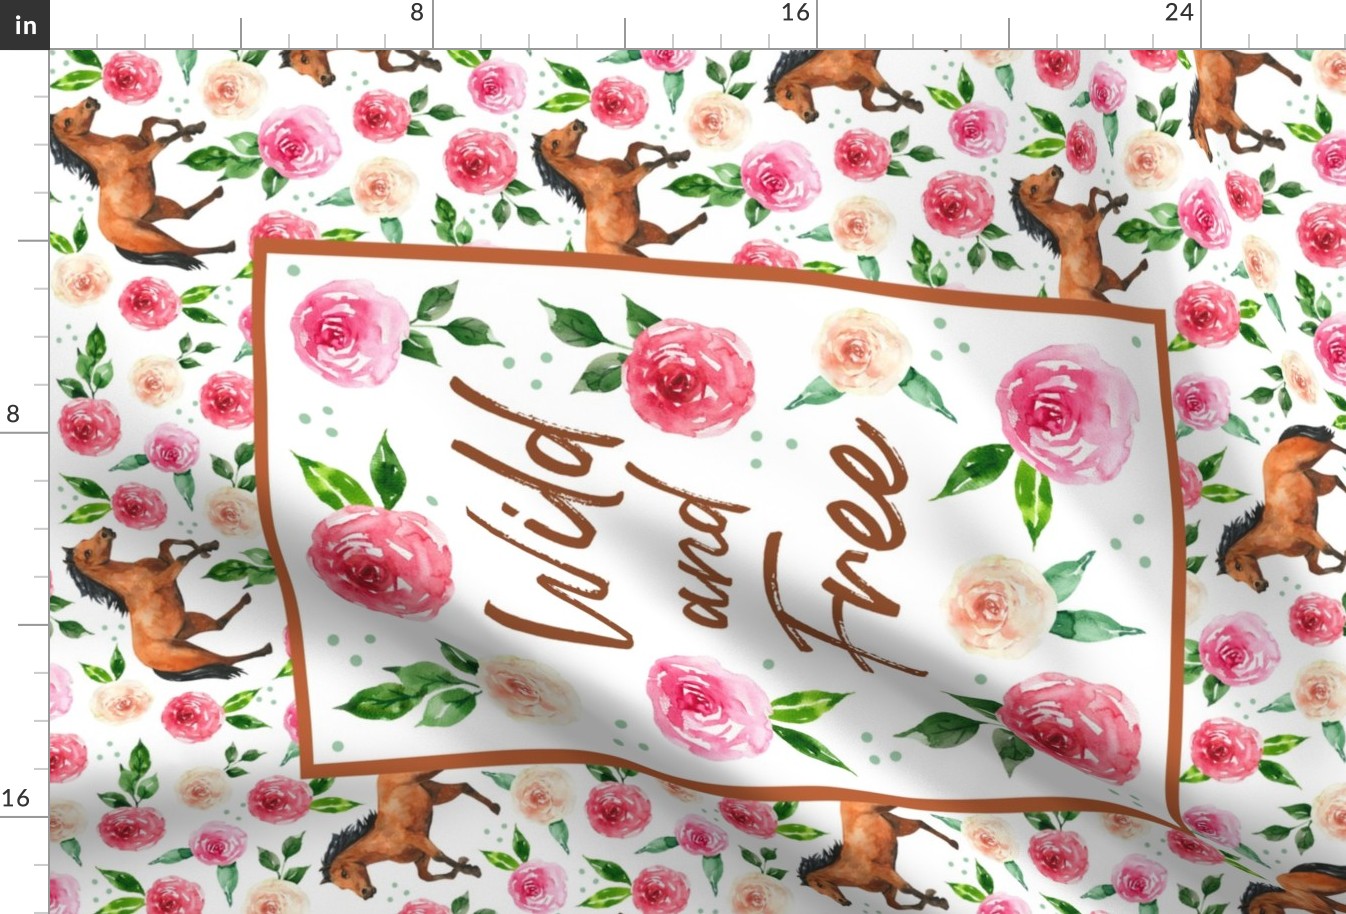 Large 27x18 Fat Quarter Panel Wild and Free Horses and Pink Roses for Wall Hanging or Tea Towel